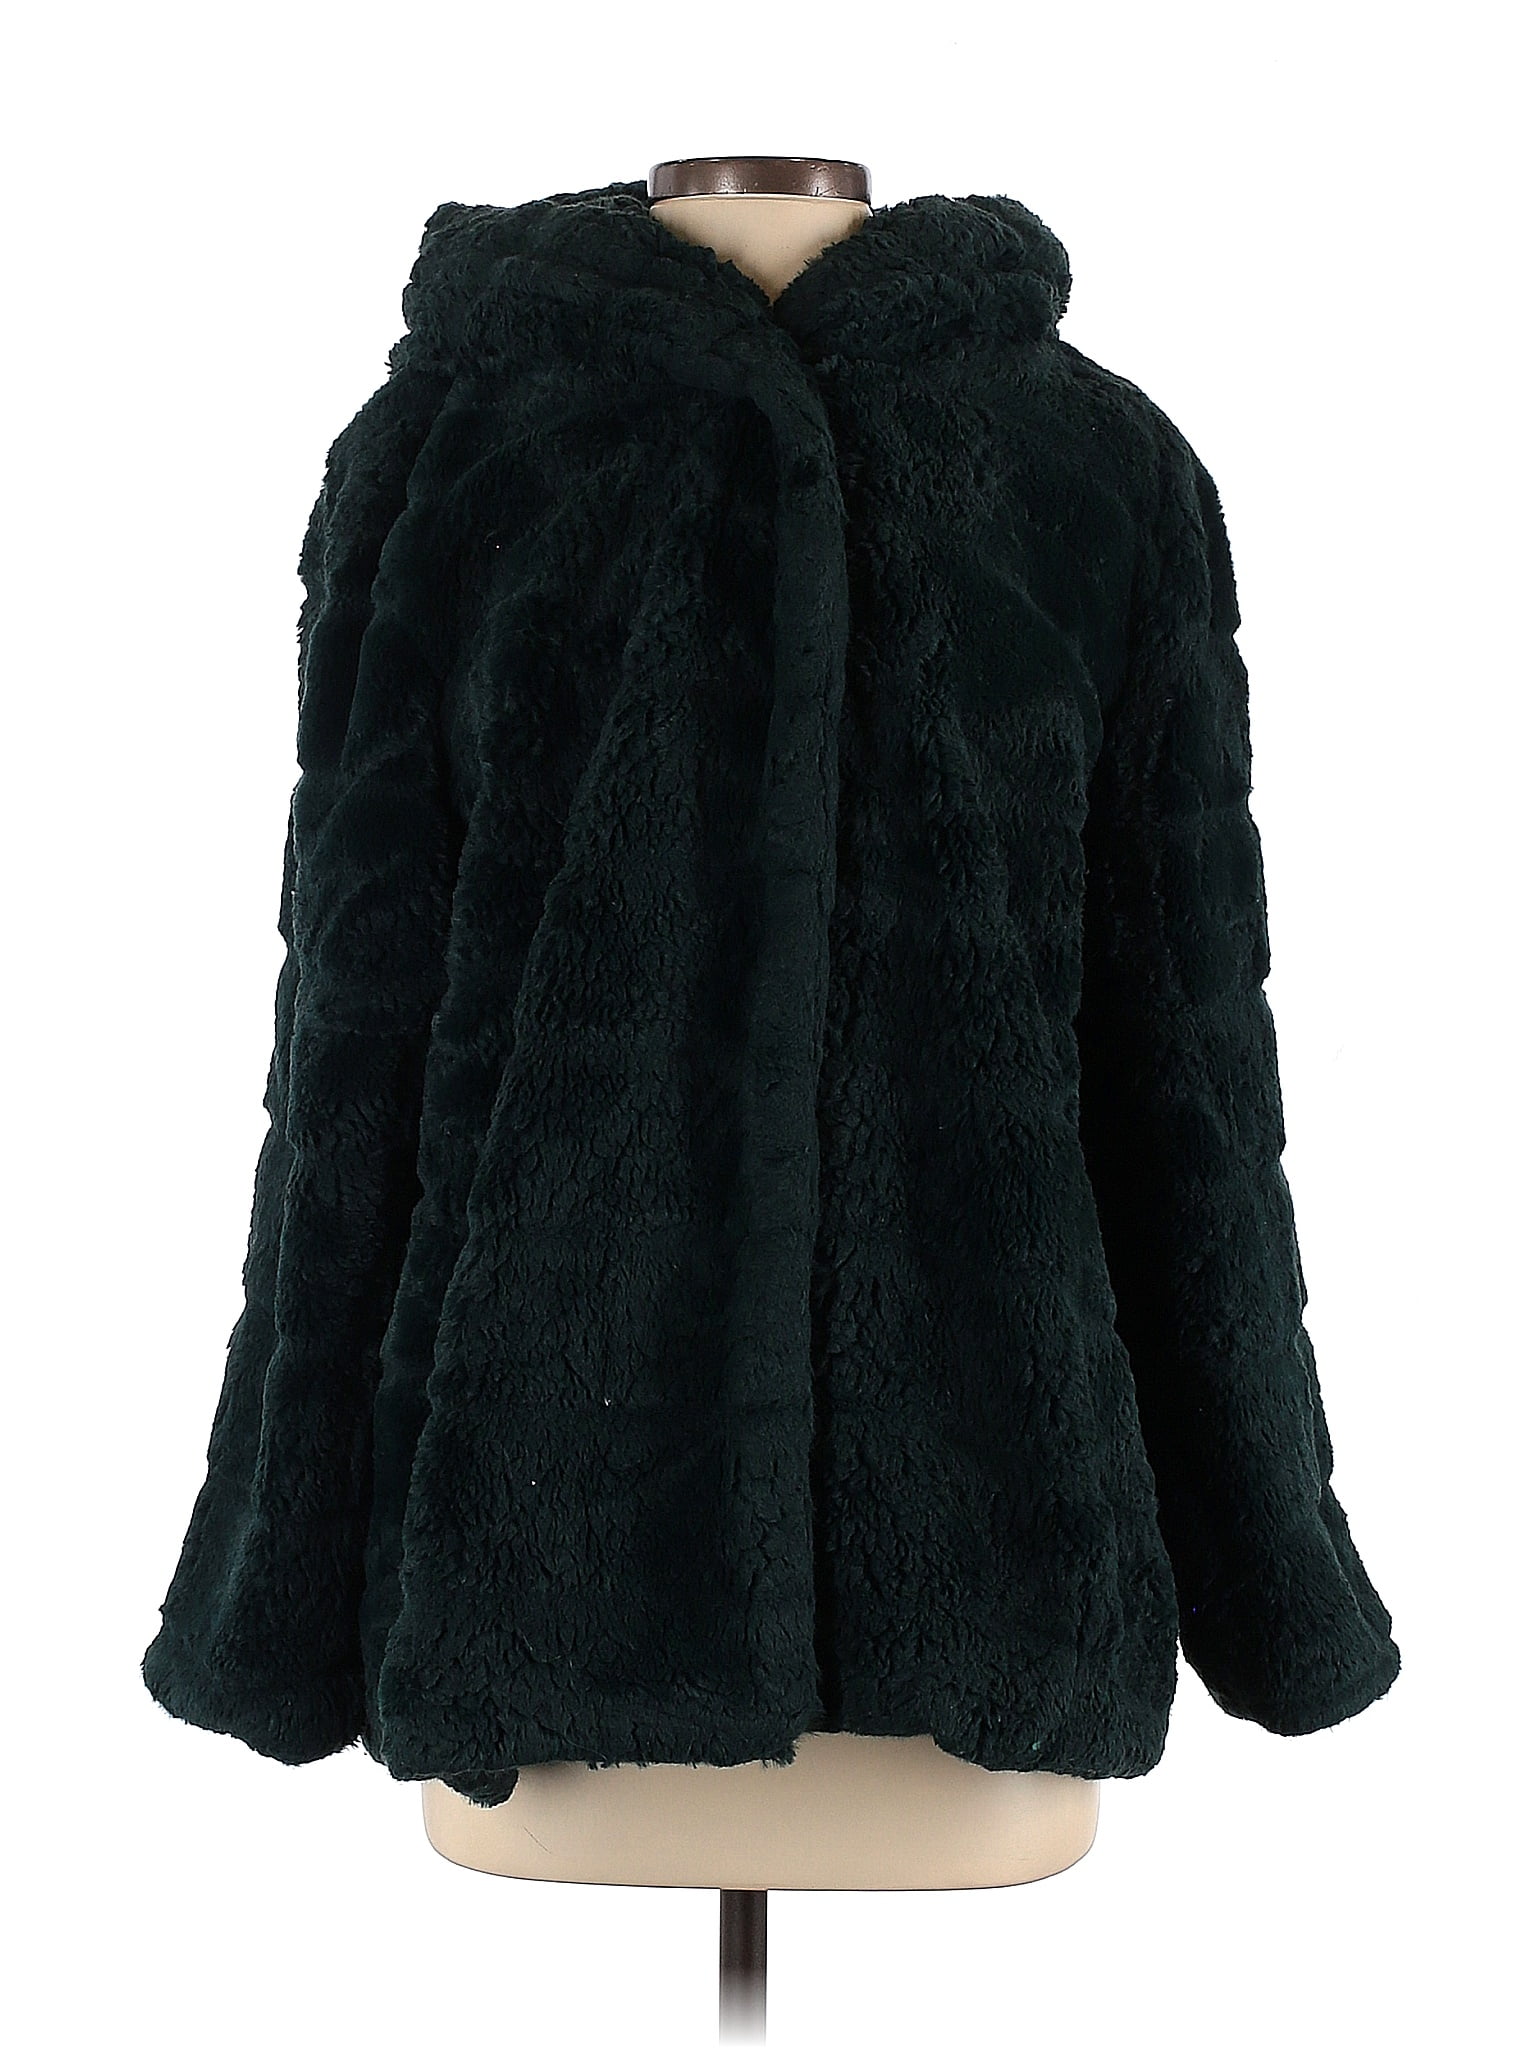 Assorted Brands 100% Polyester Solid Teal Faux Fur Jacket Size 2 - 59% ...